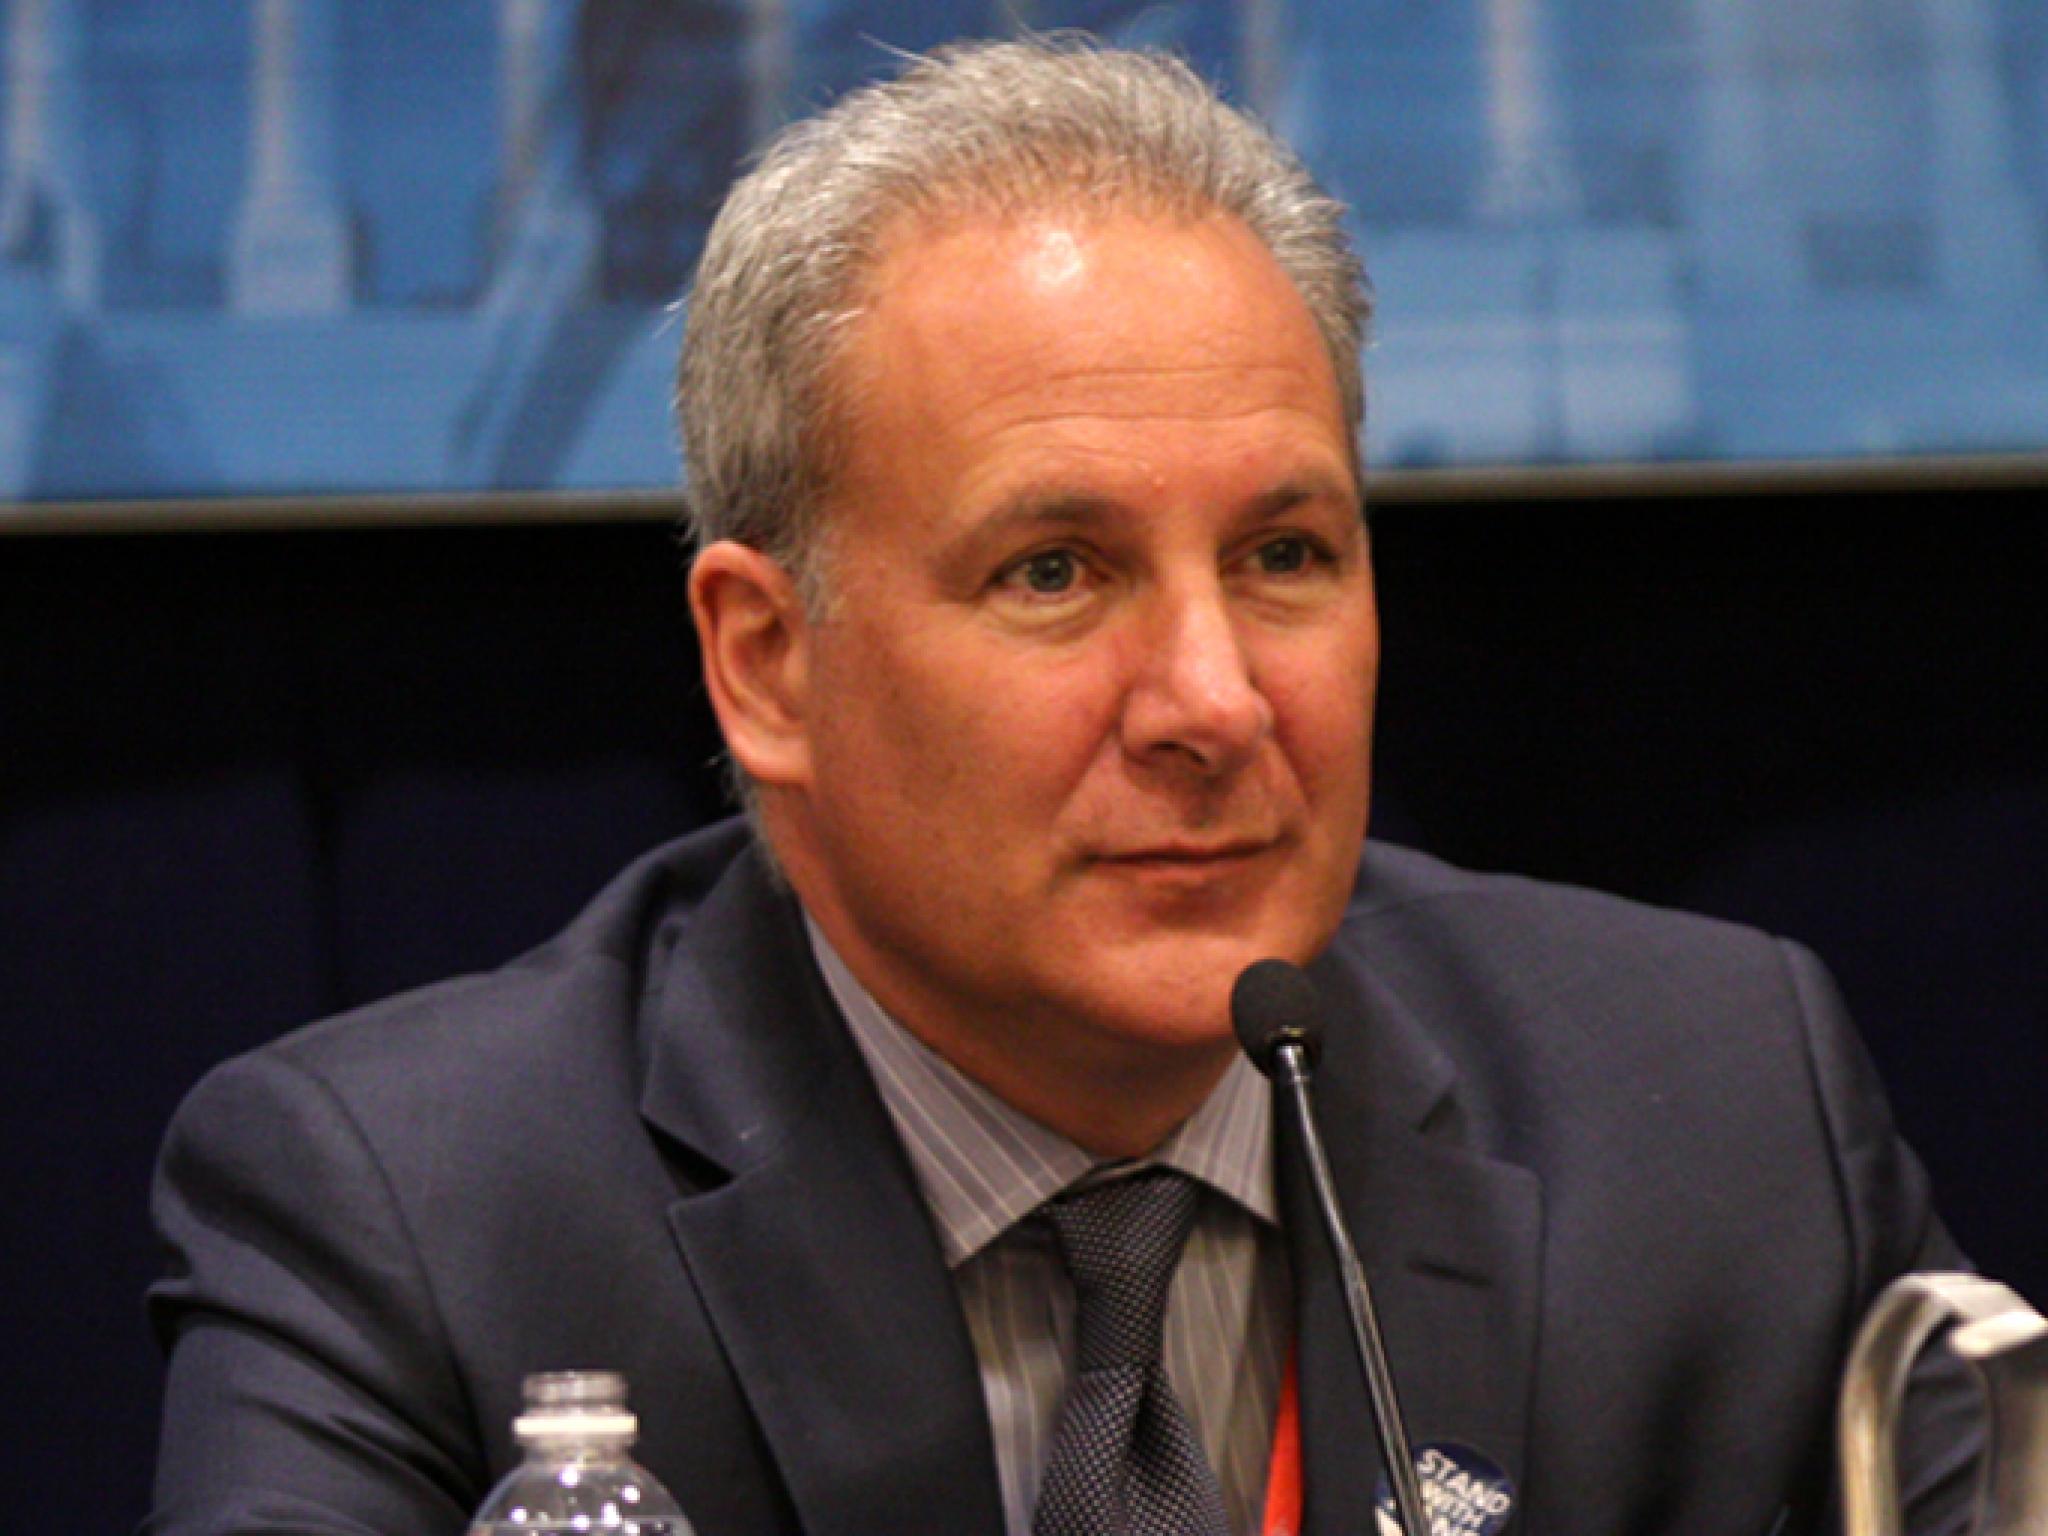  peter-schiff-hits-out-at-michael-saylor-slams-trend-of-having-bitcoin-on-balance-sheets-companies-shouldnt-flat-out-gamble-with-shareholders-funds 